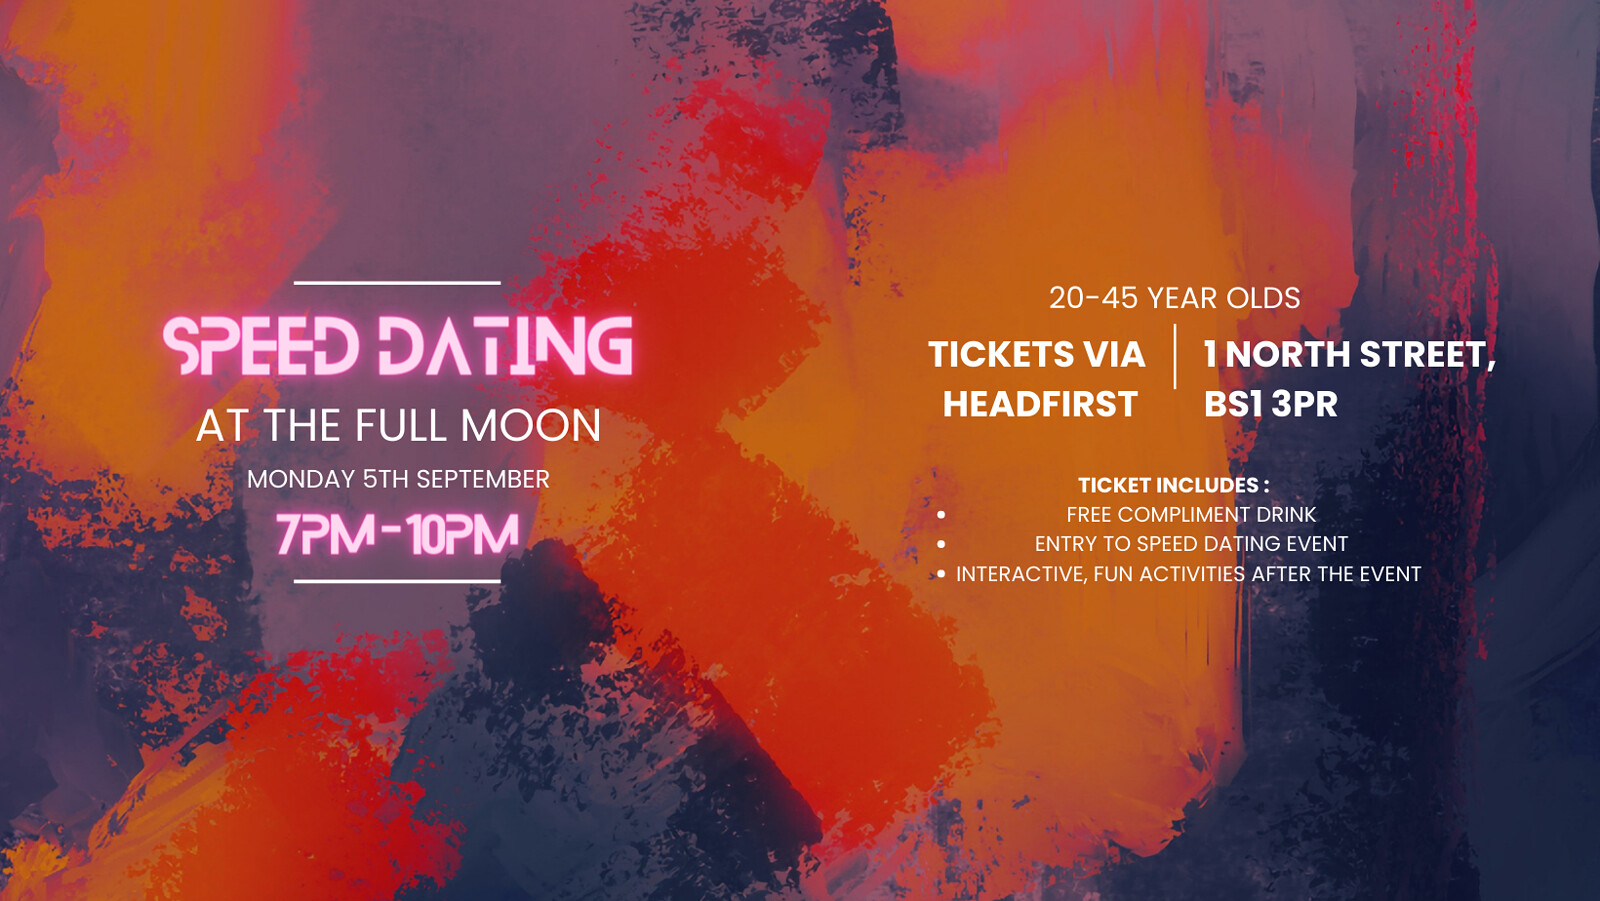 Speed Dating at the Full Moon at The Attic Bar